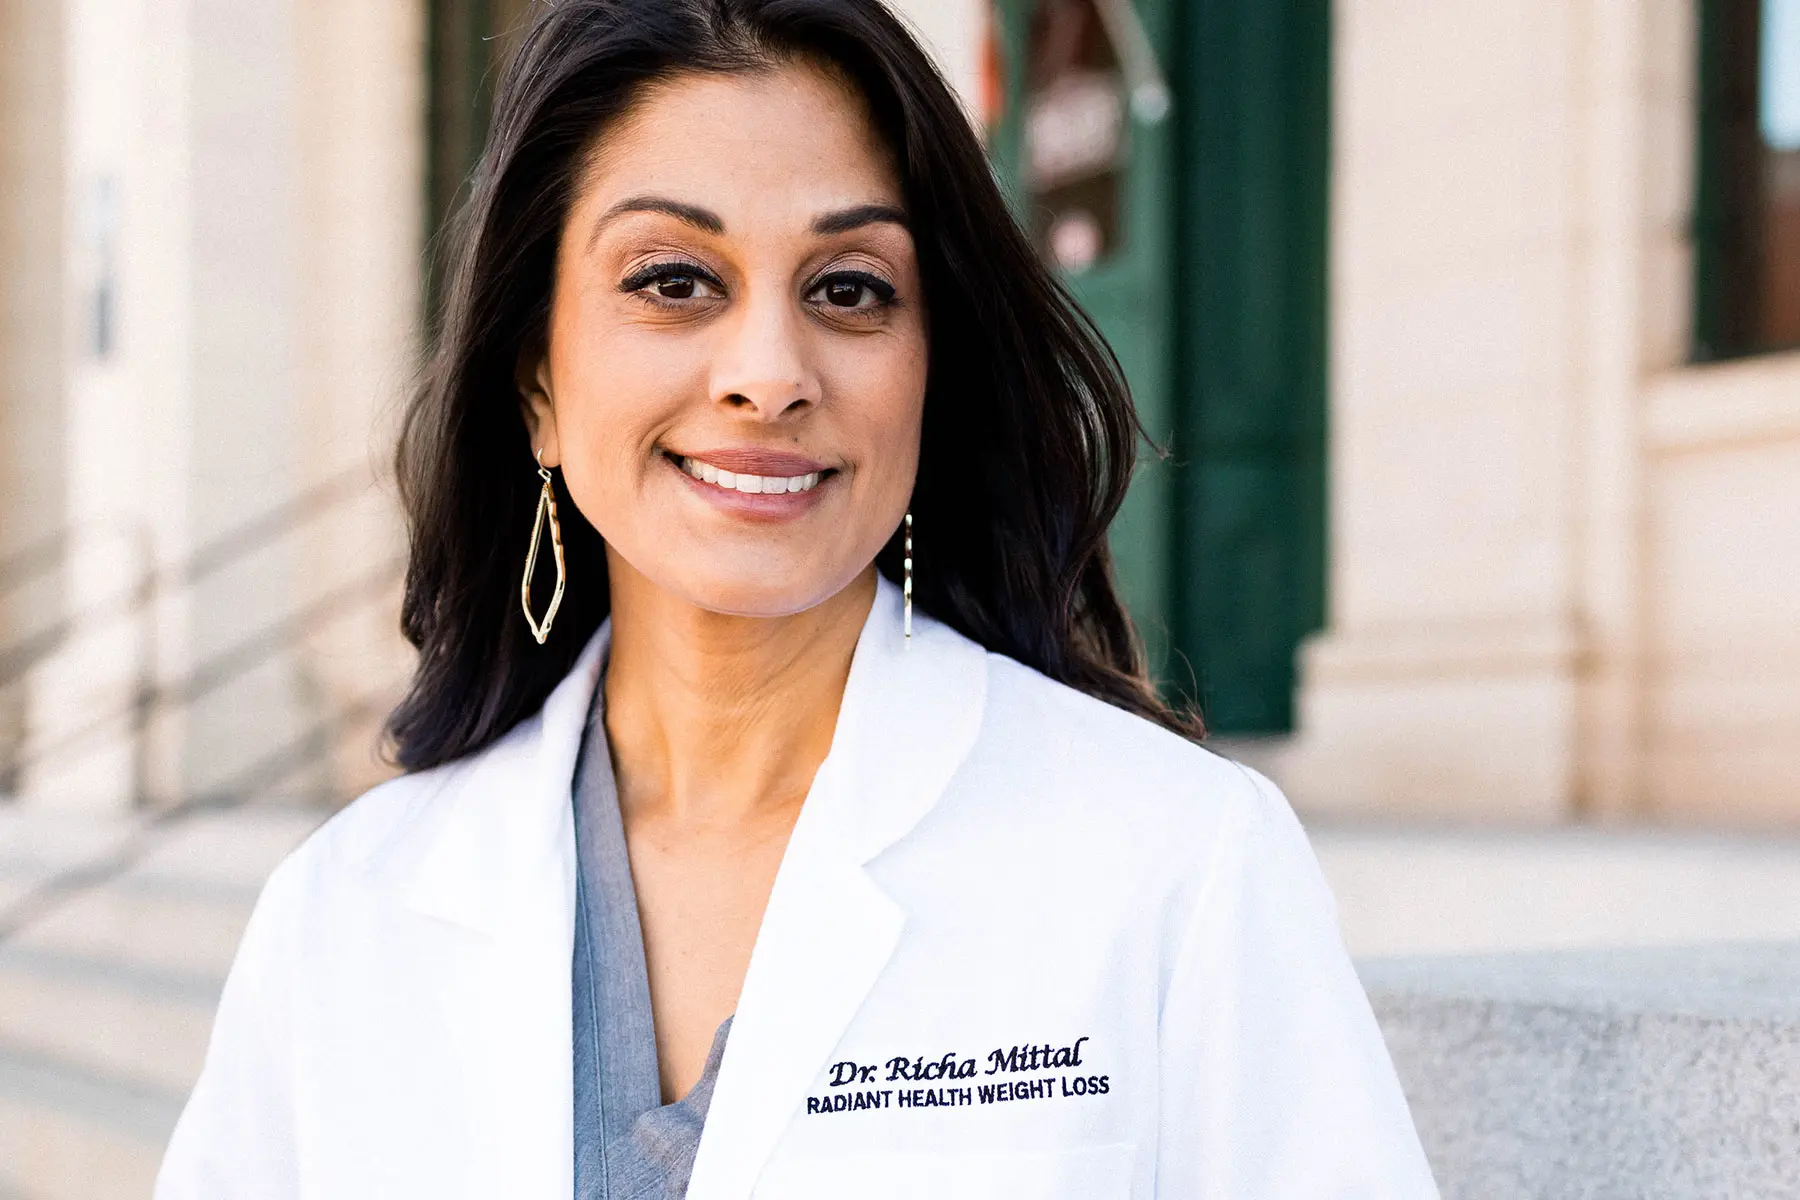 Dr. Richa Mittal in Lab Coat, smiling outdoors.